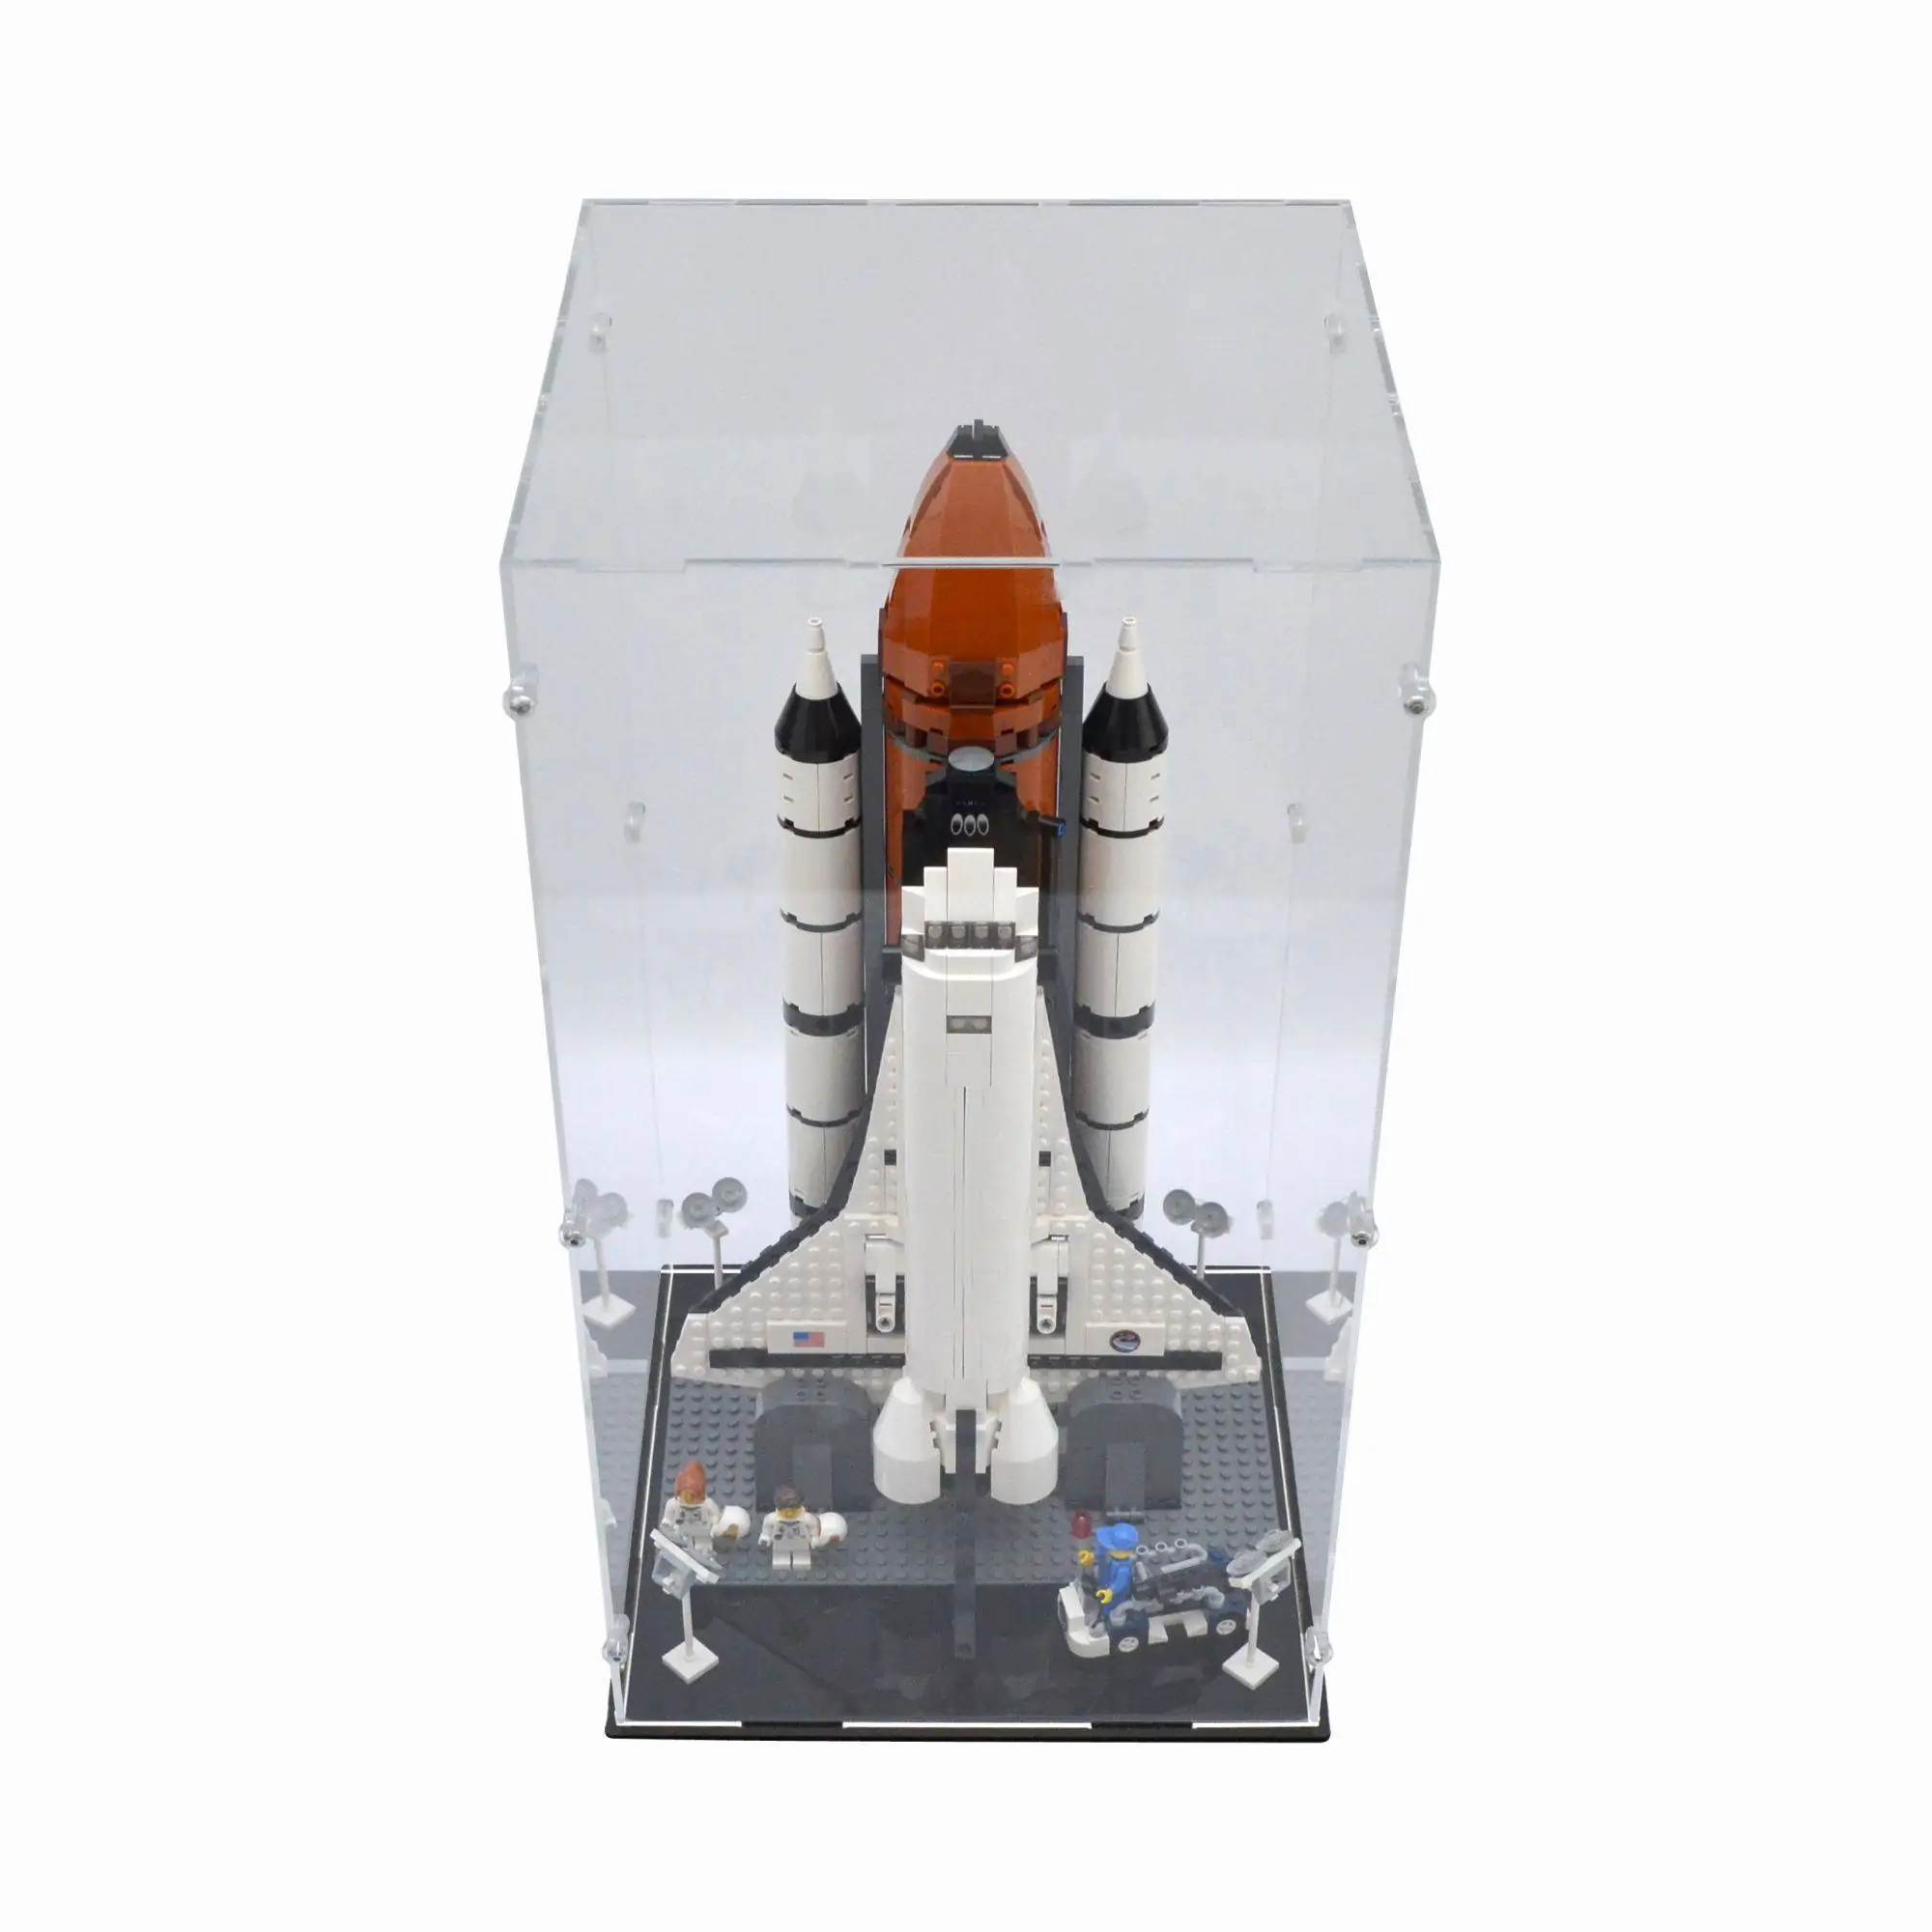 Lego 10231 Shuttle expeditions NEW